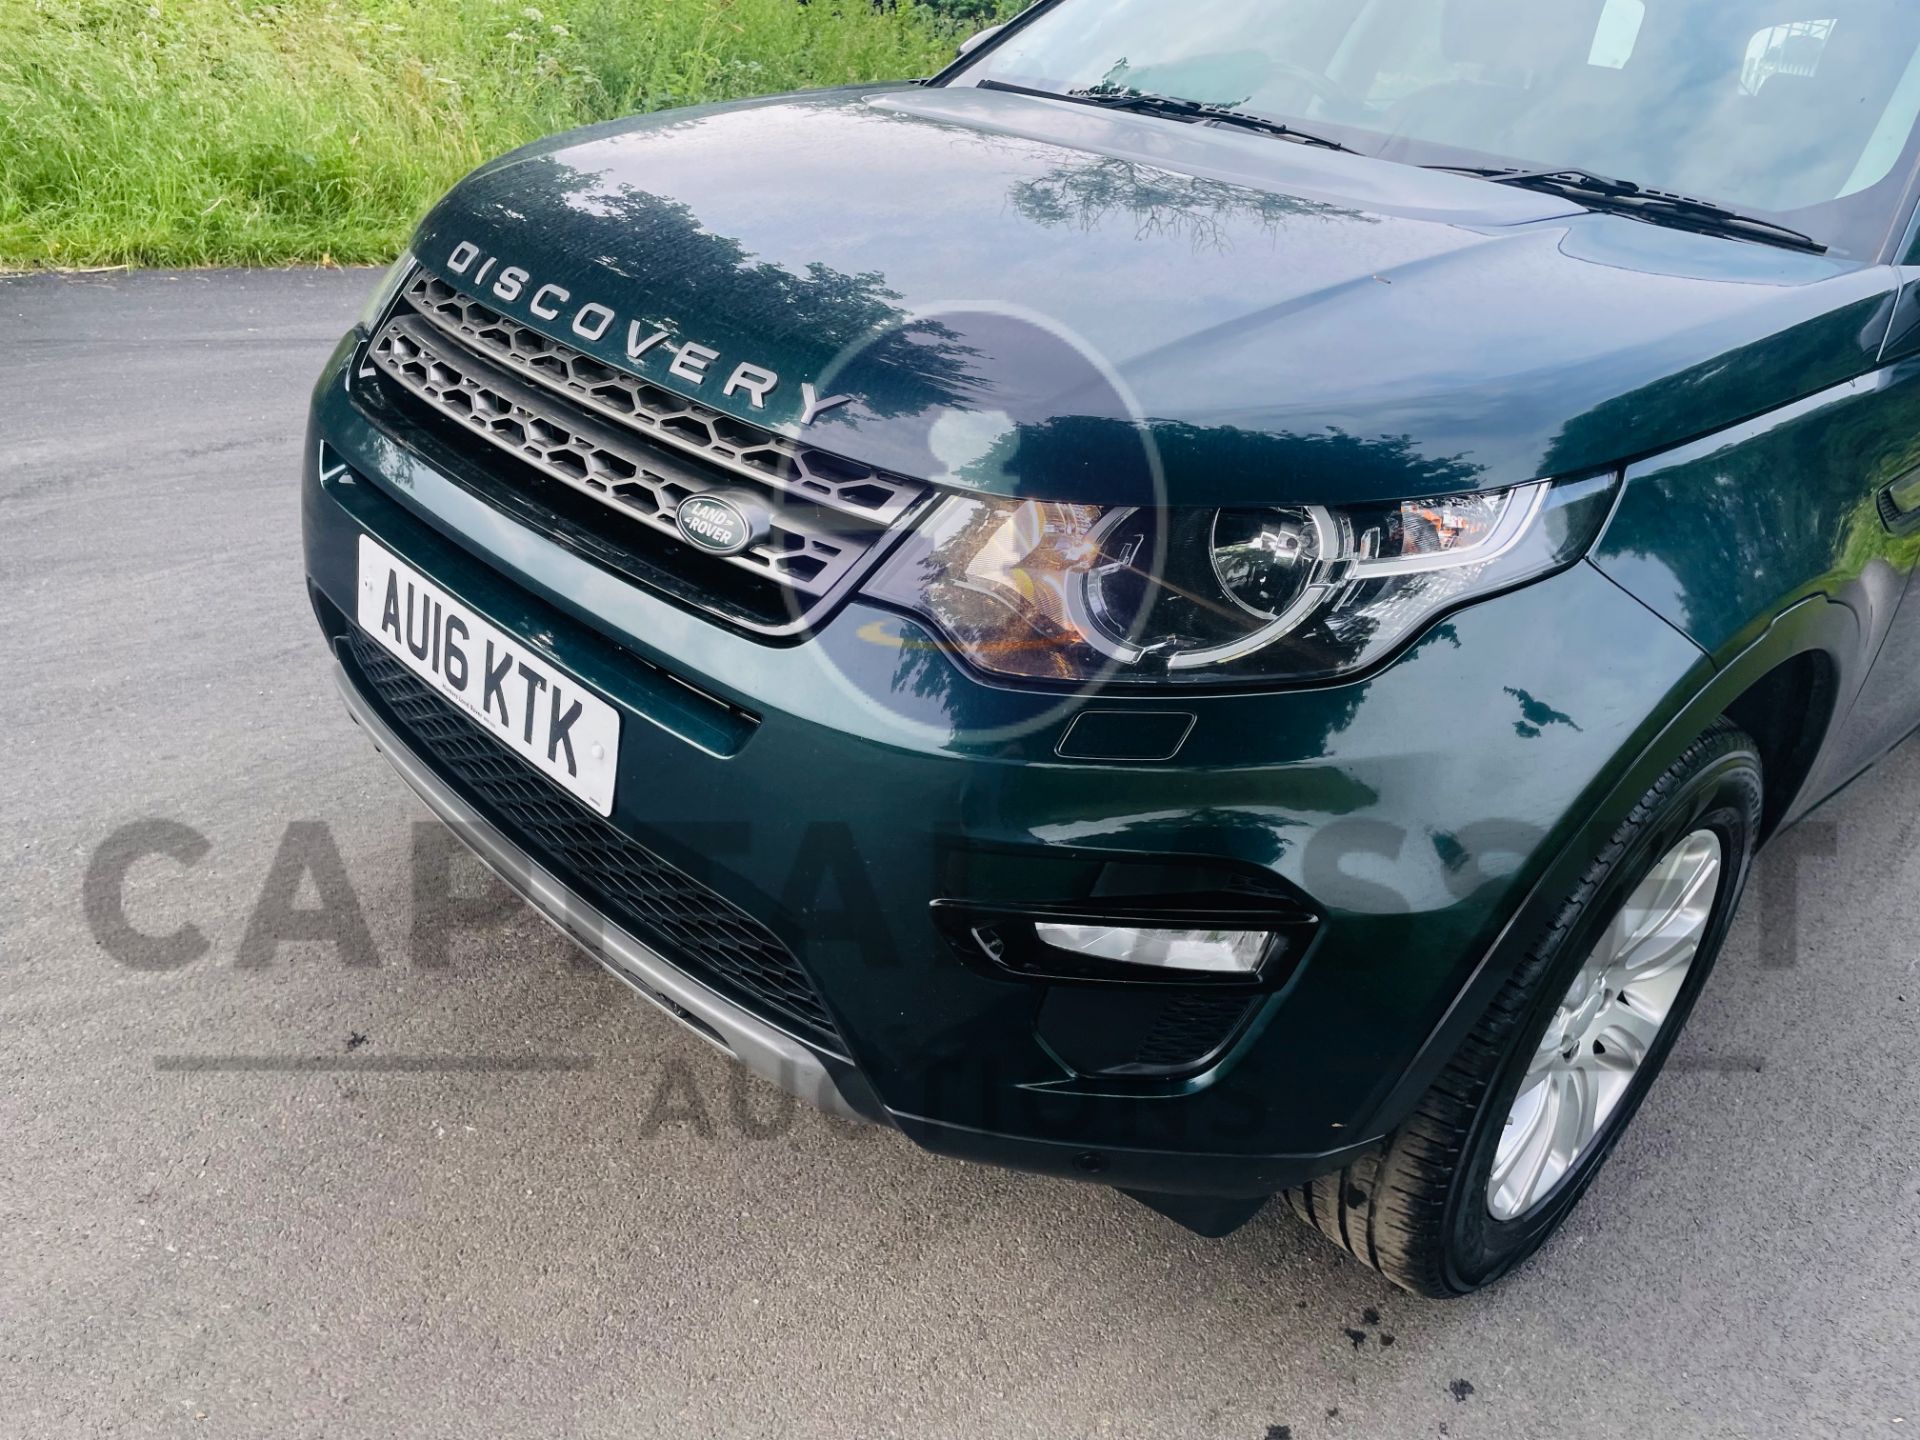 LAND ROVER DISCOVERY SPORT *SE TECH* 7 SEATER SUV (2016) 2.0 TD4 - AUTO *LEATHER & NAV* (NO VAT) - Image 16 of 54